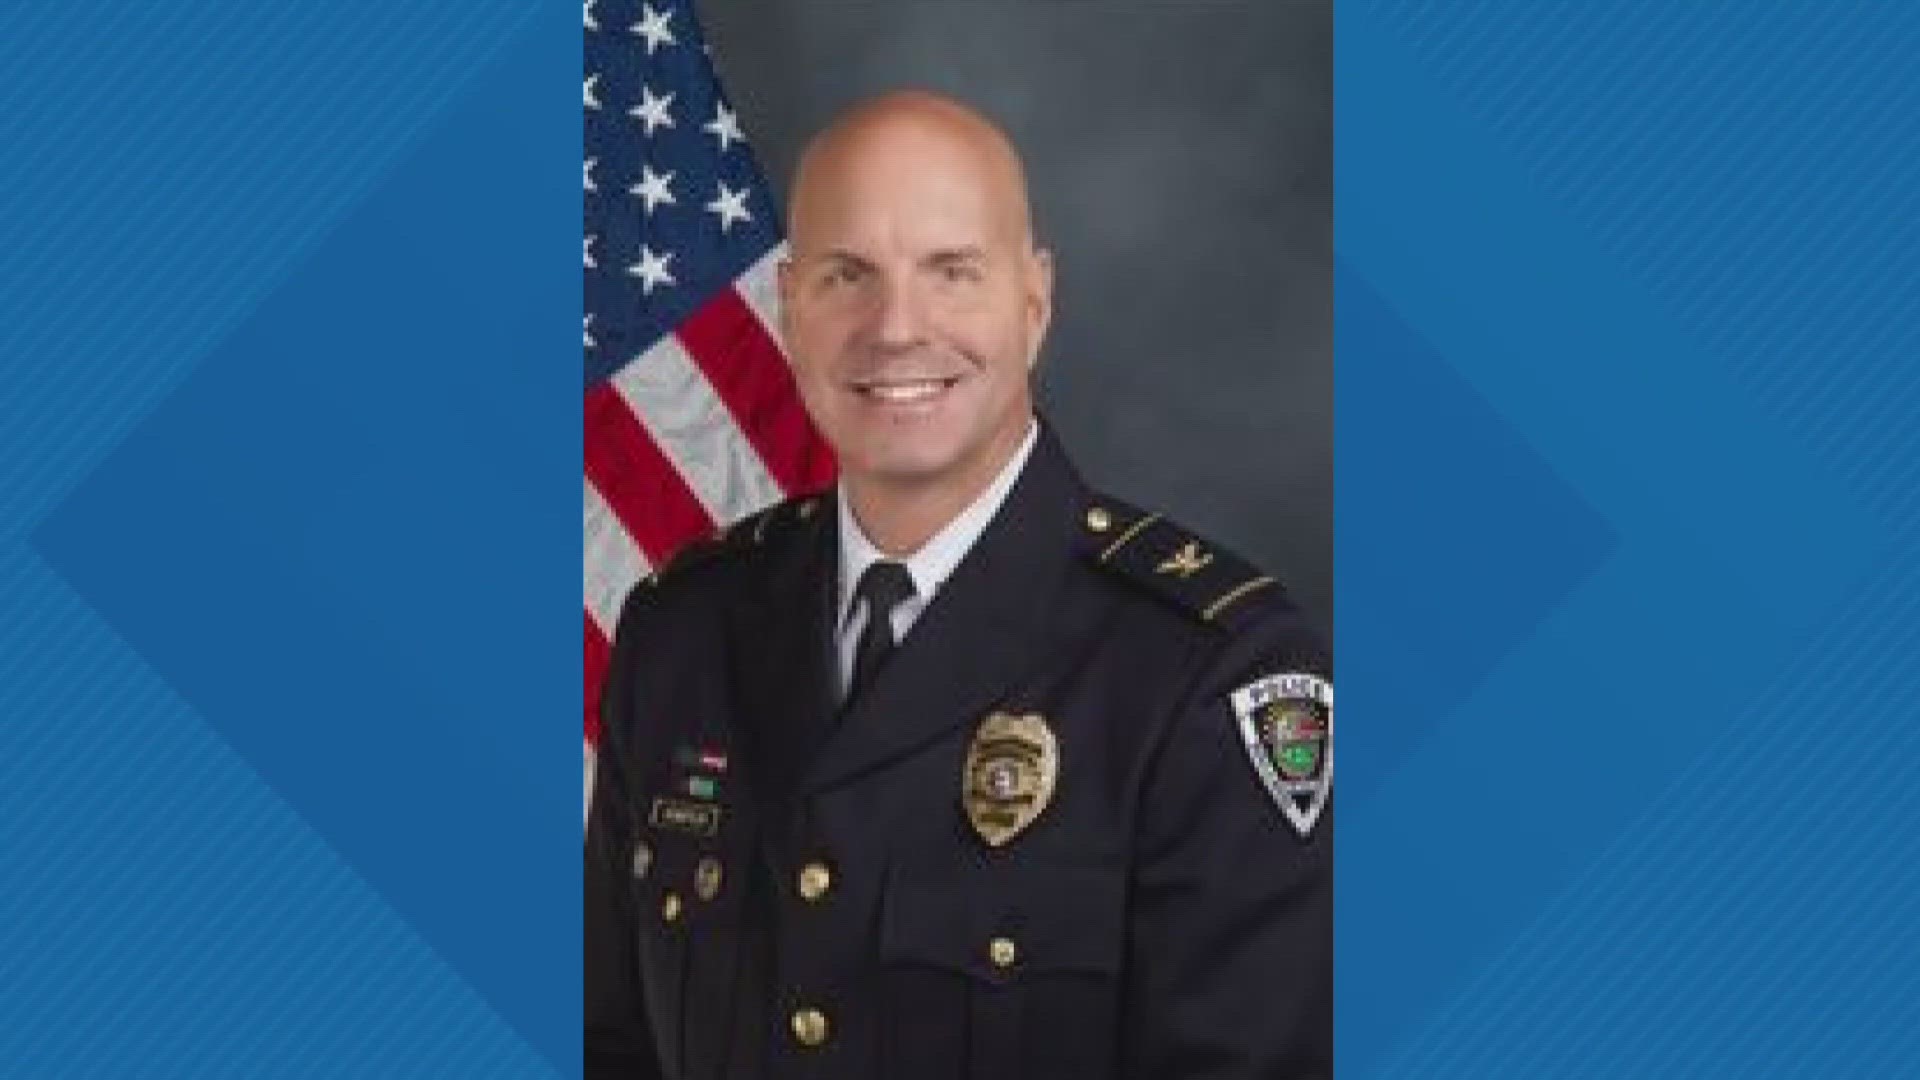 The former chief of the Ballwin Police Department was removed from office by the board of aldermen, He filed a lawsuit last Friday against the city.